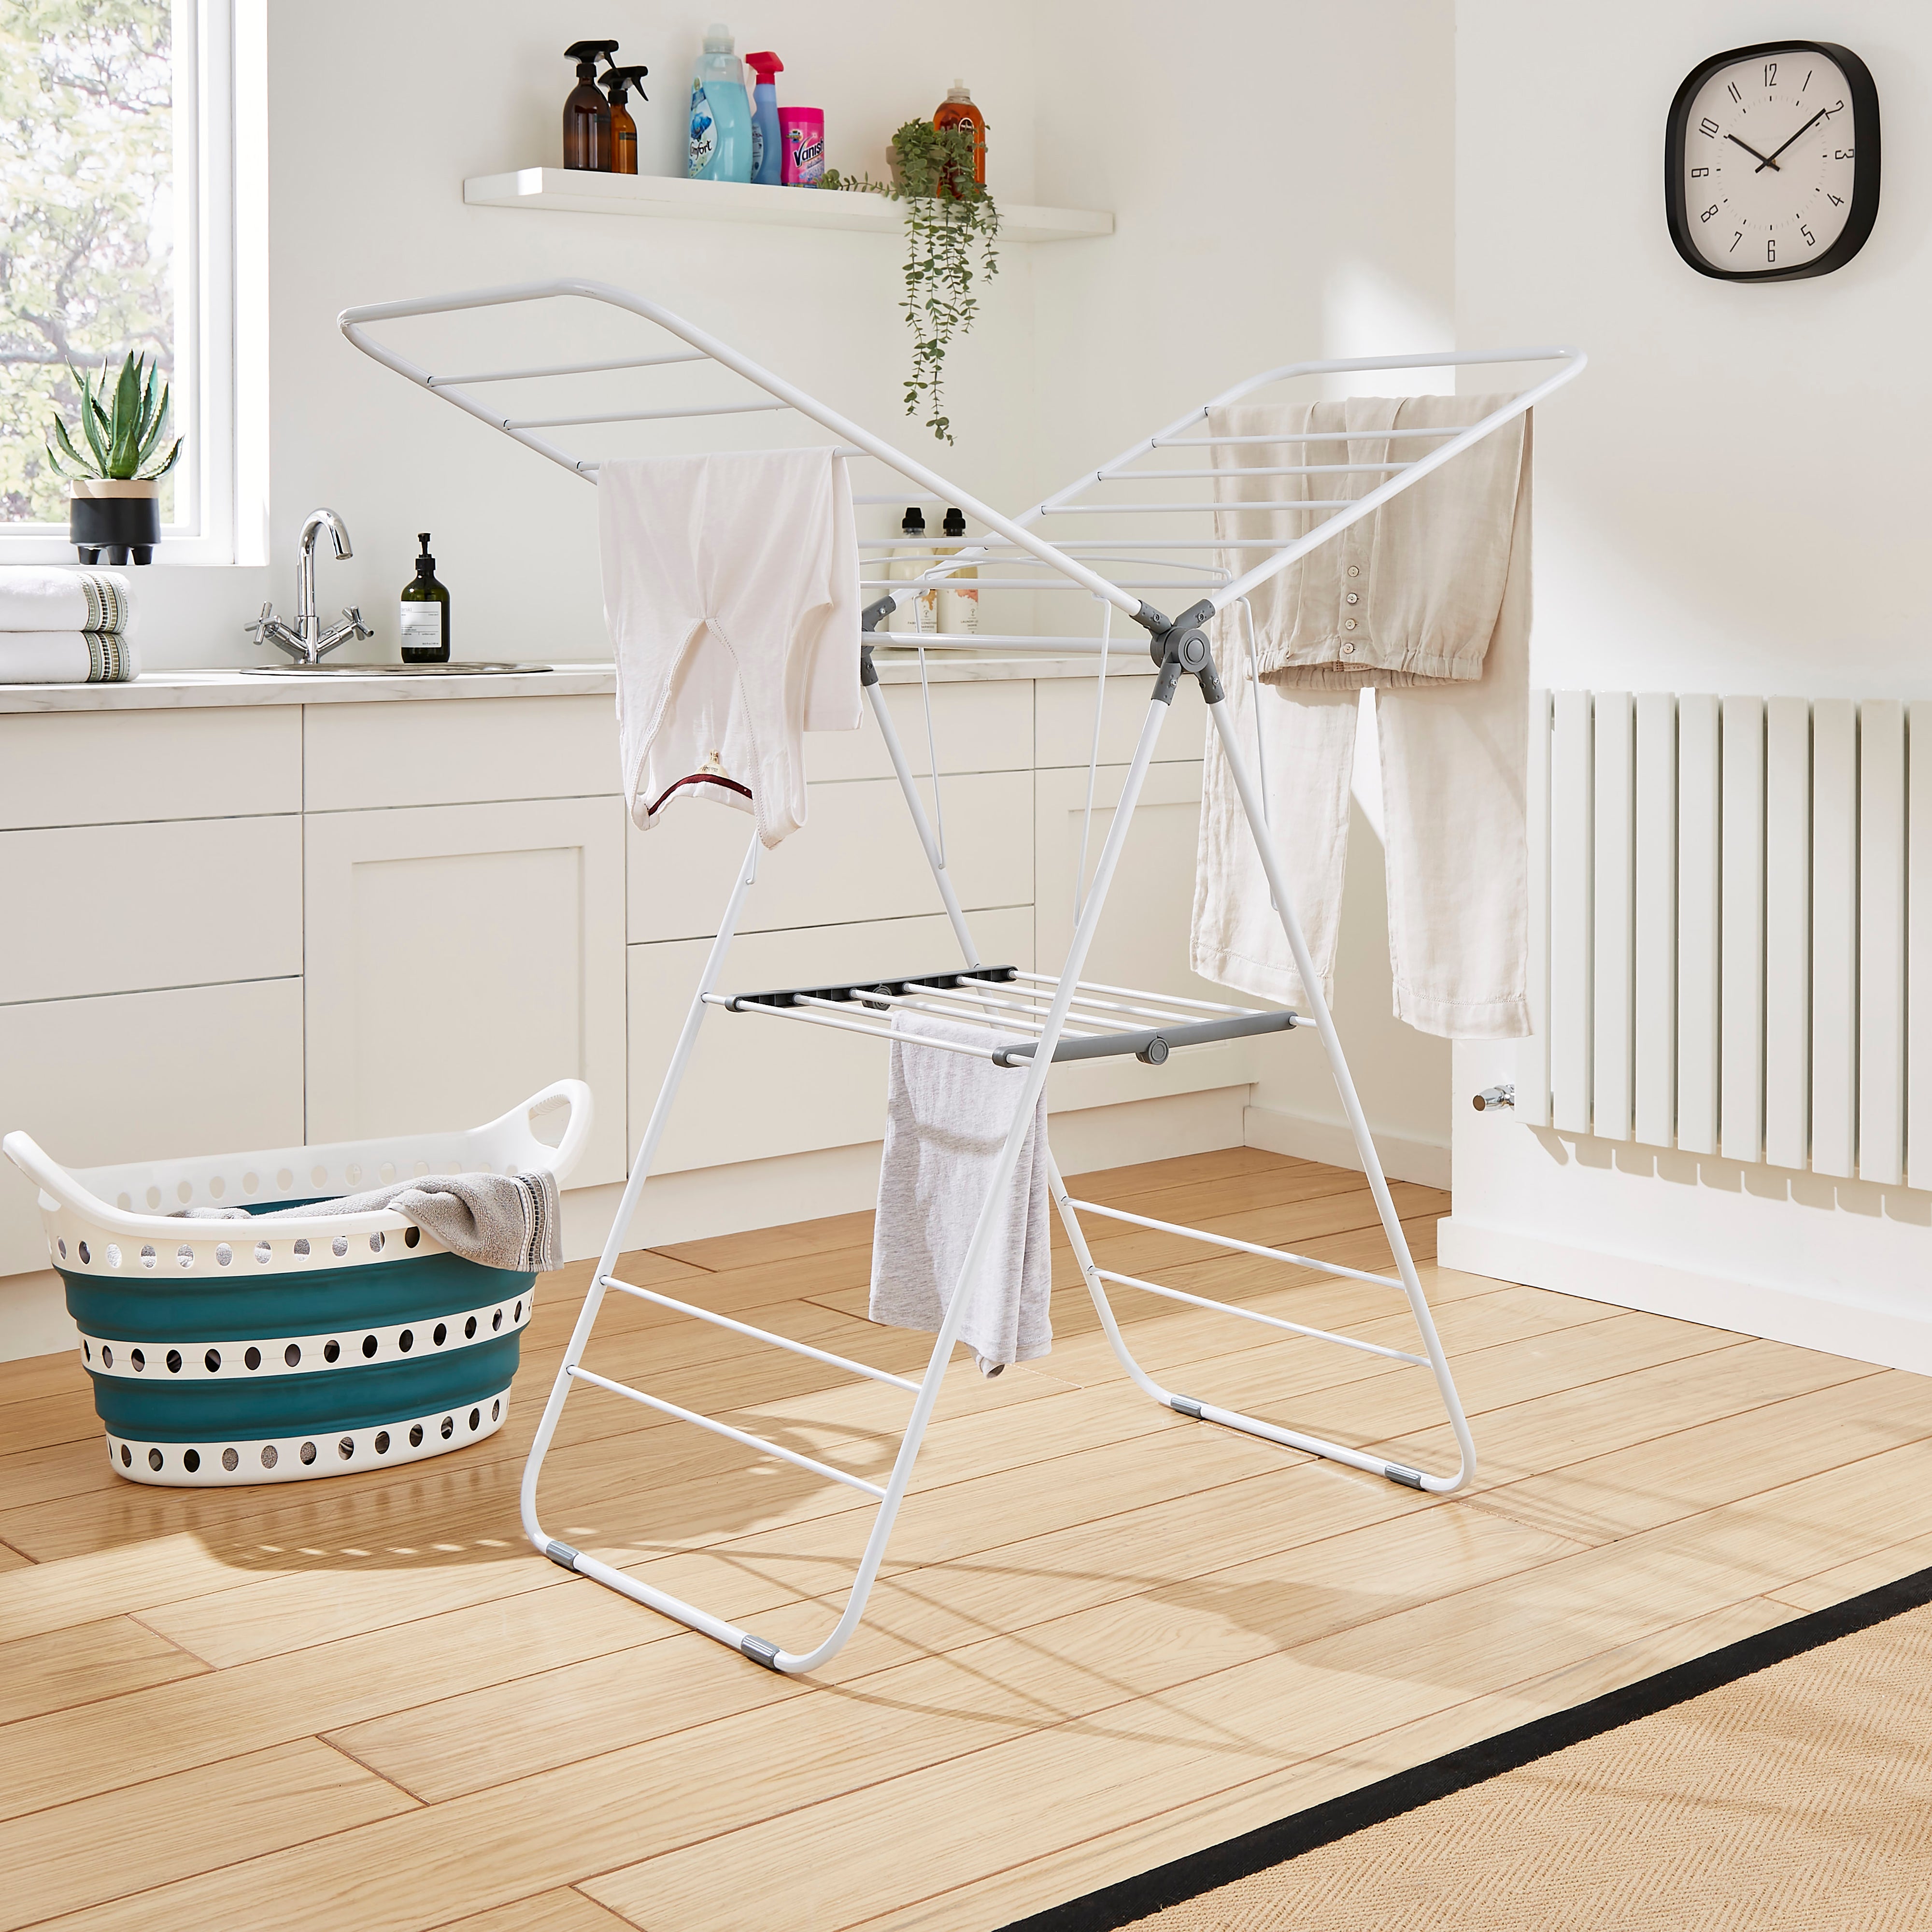 18m Winged Clothes Airer